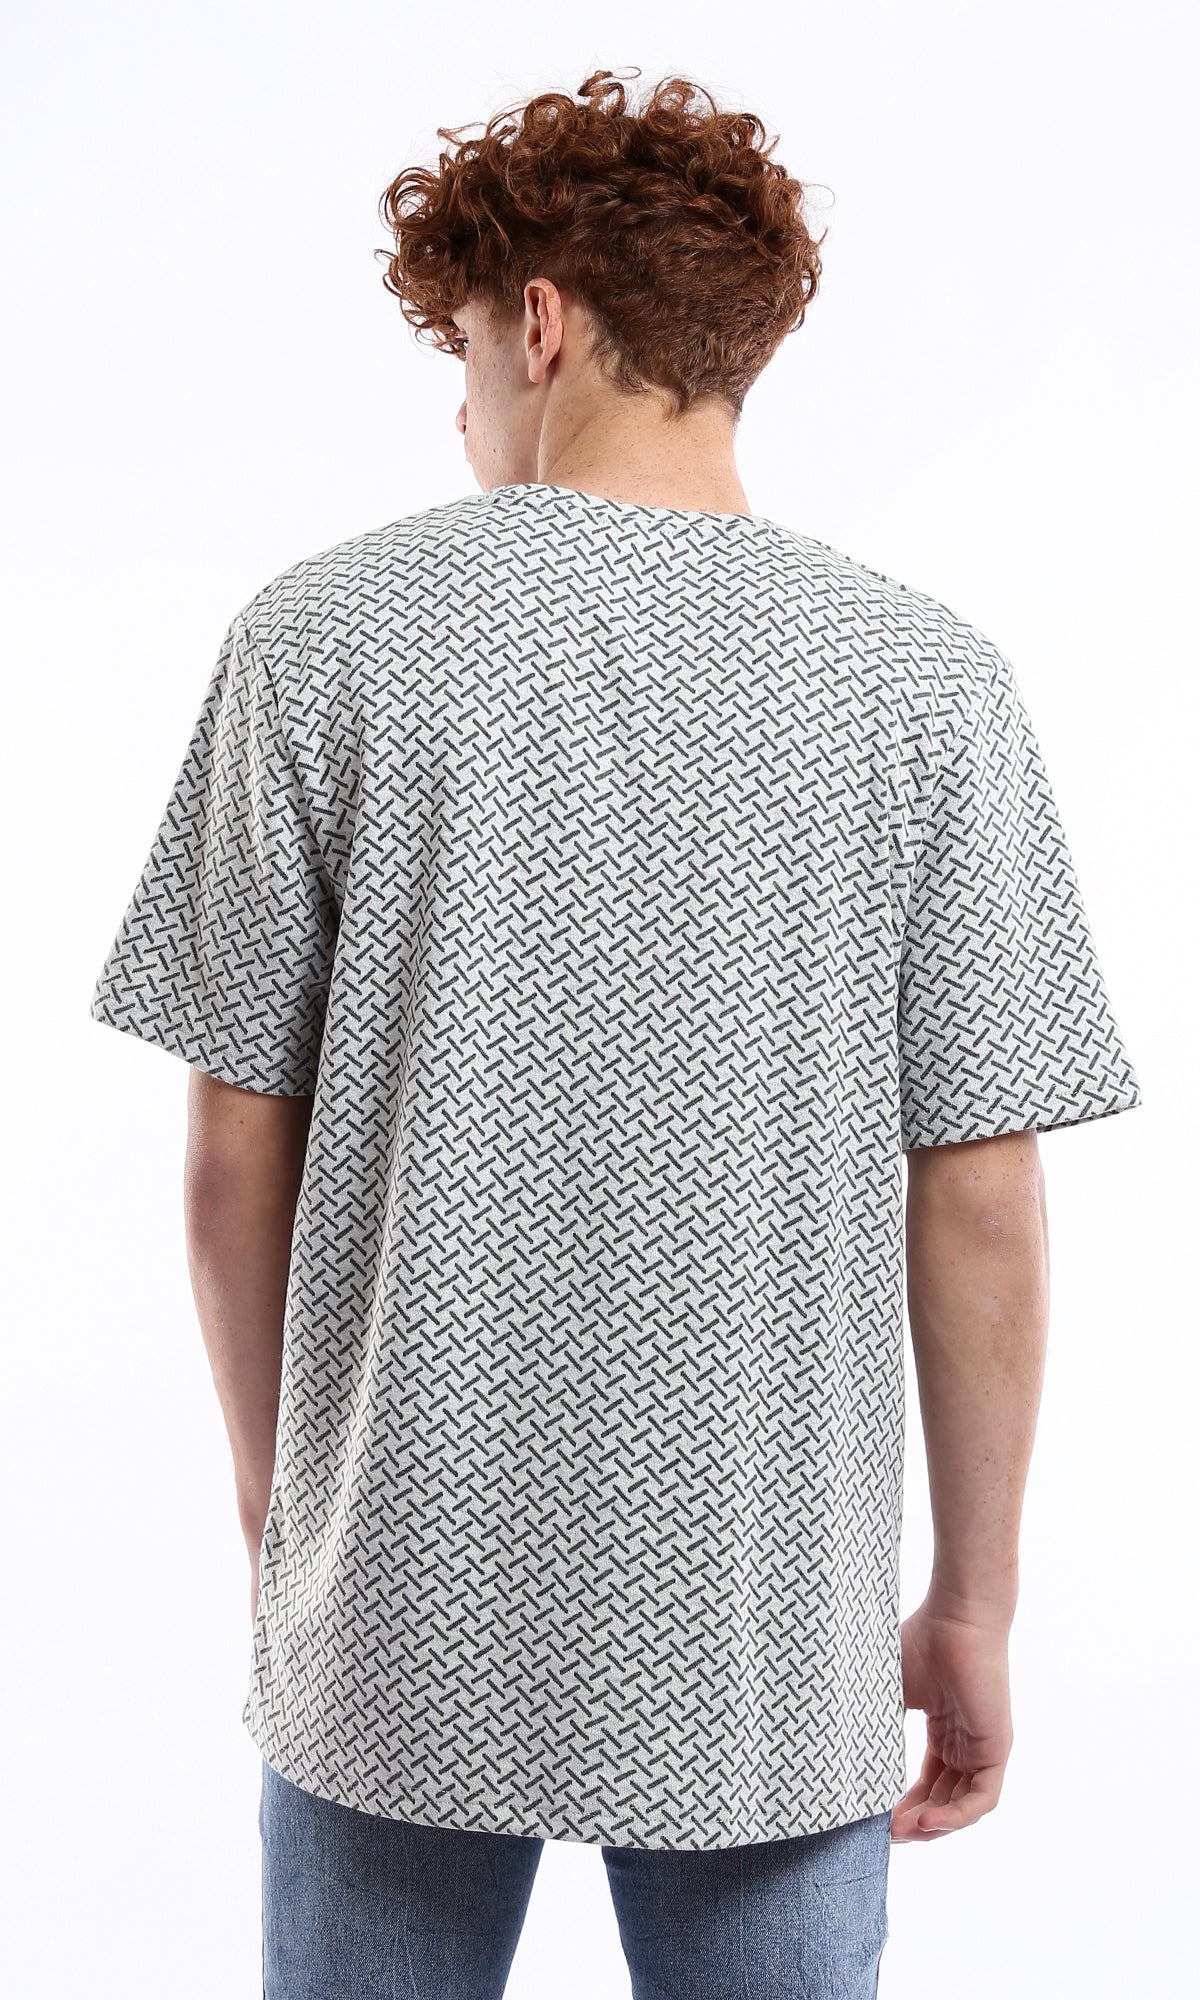 O178555 Medium-Weight Patterned Grey Casual Tee